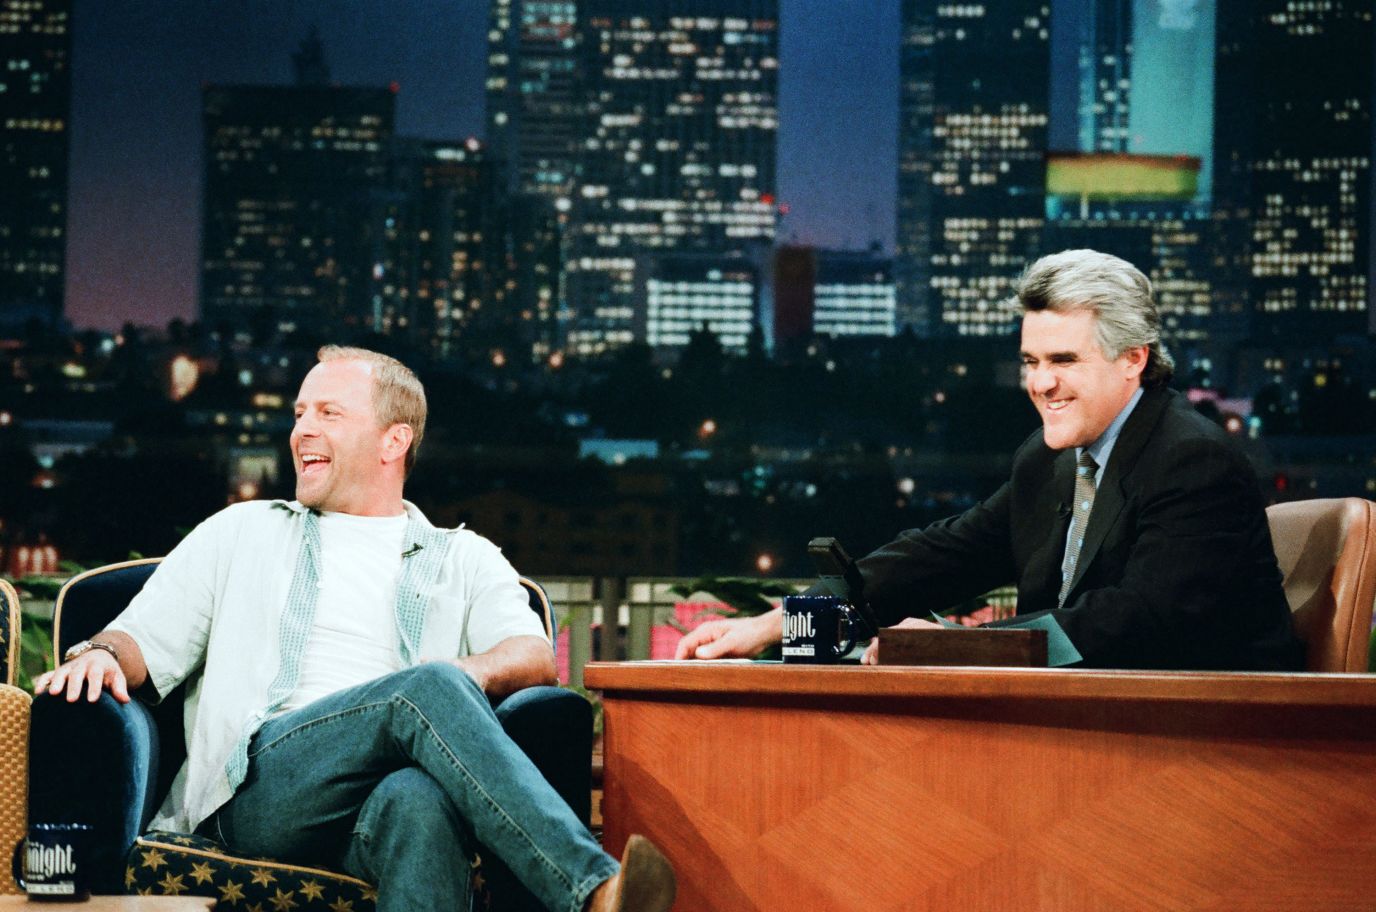 Willis appears on "The Tonight Show" with Jay Leno in 1997.